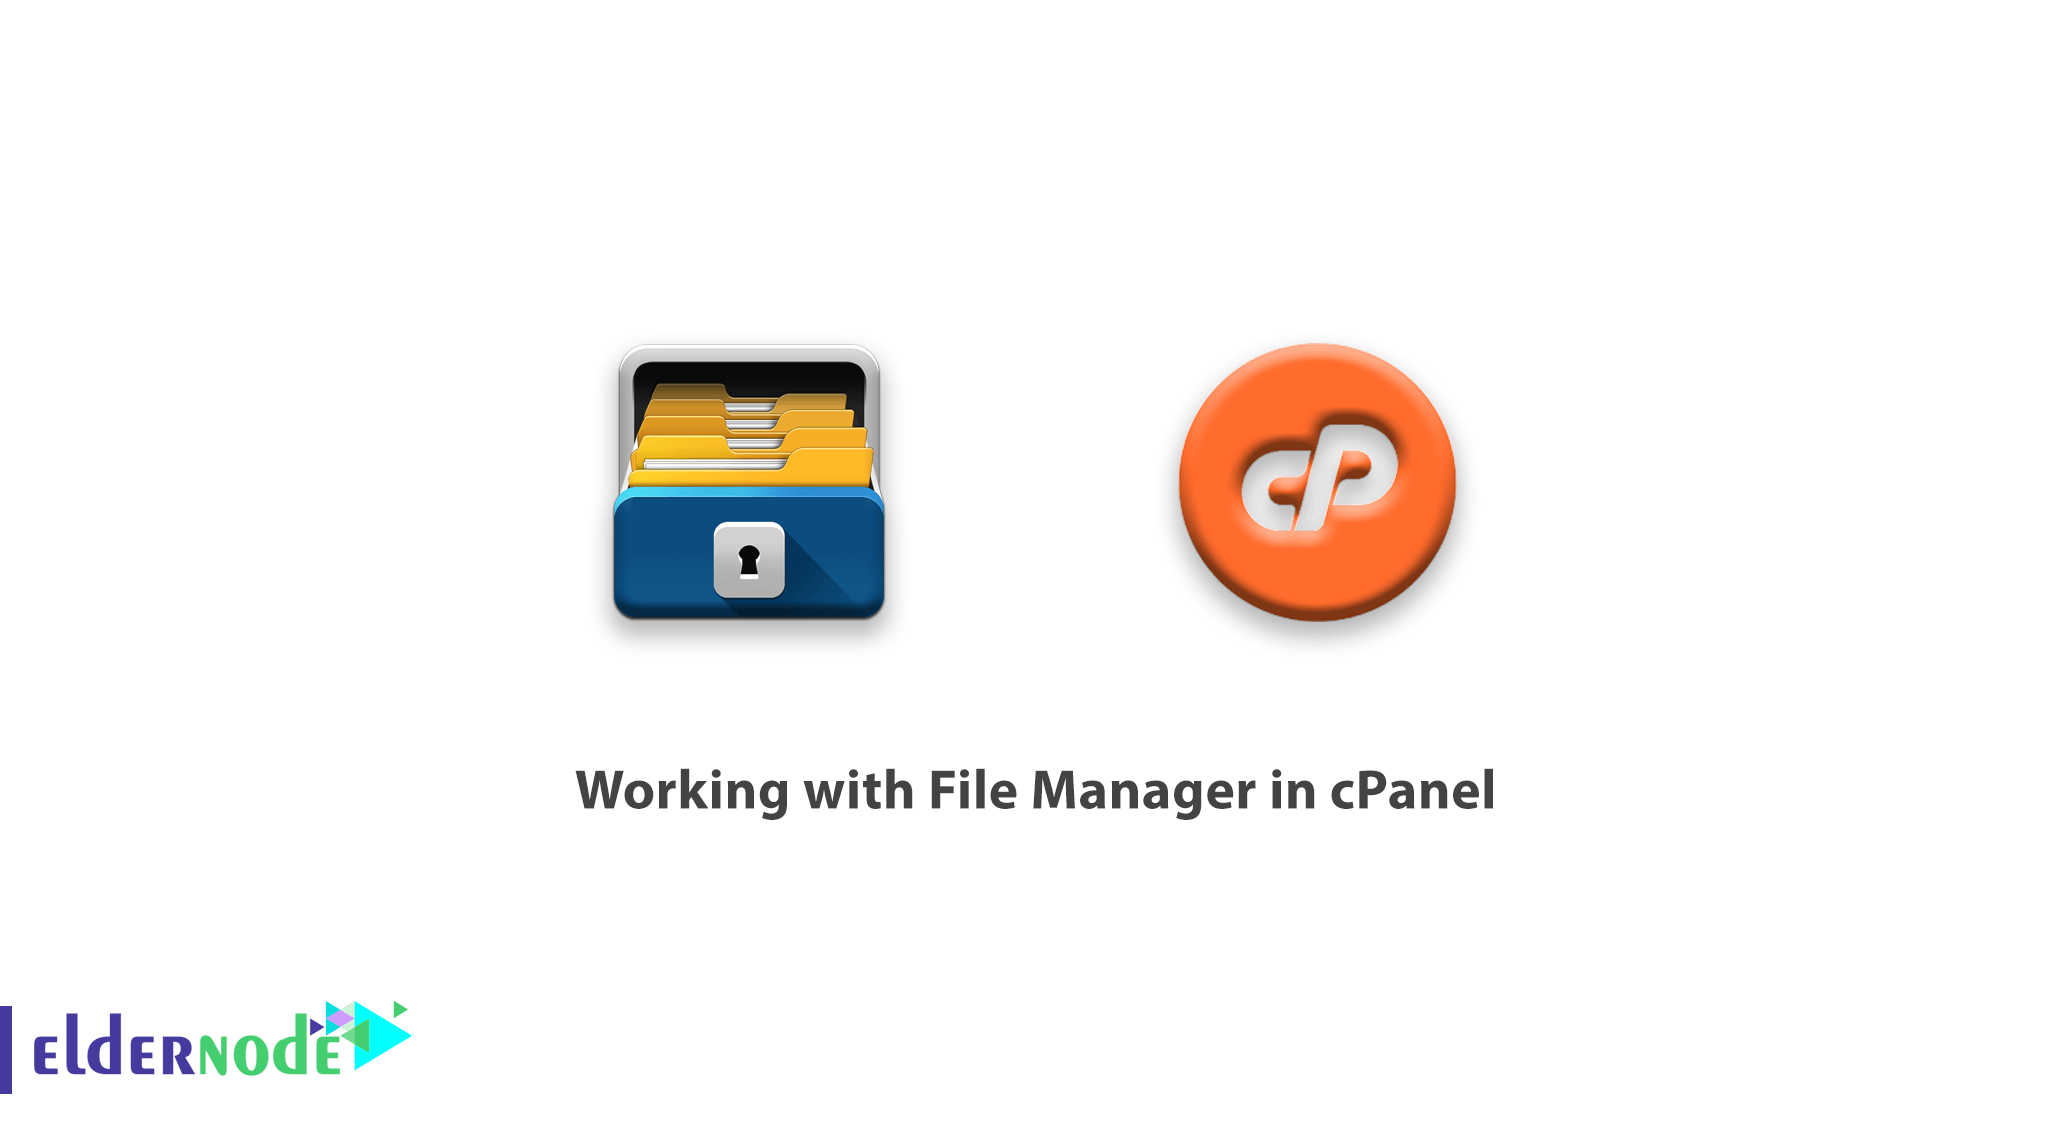 Working with File Manager in cPanel